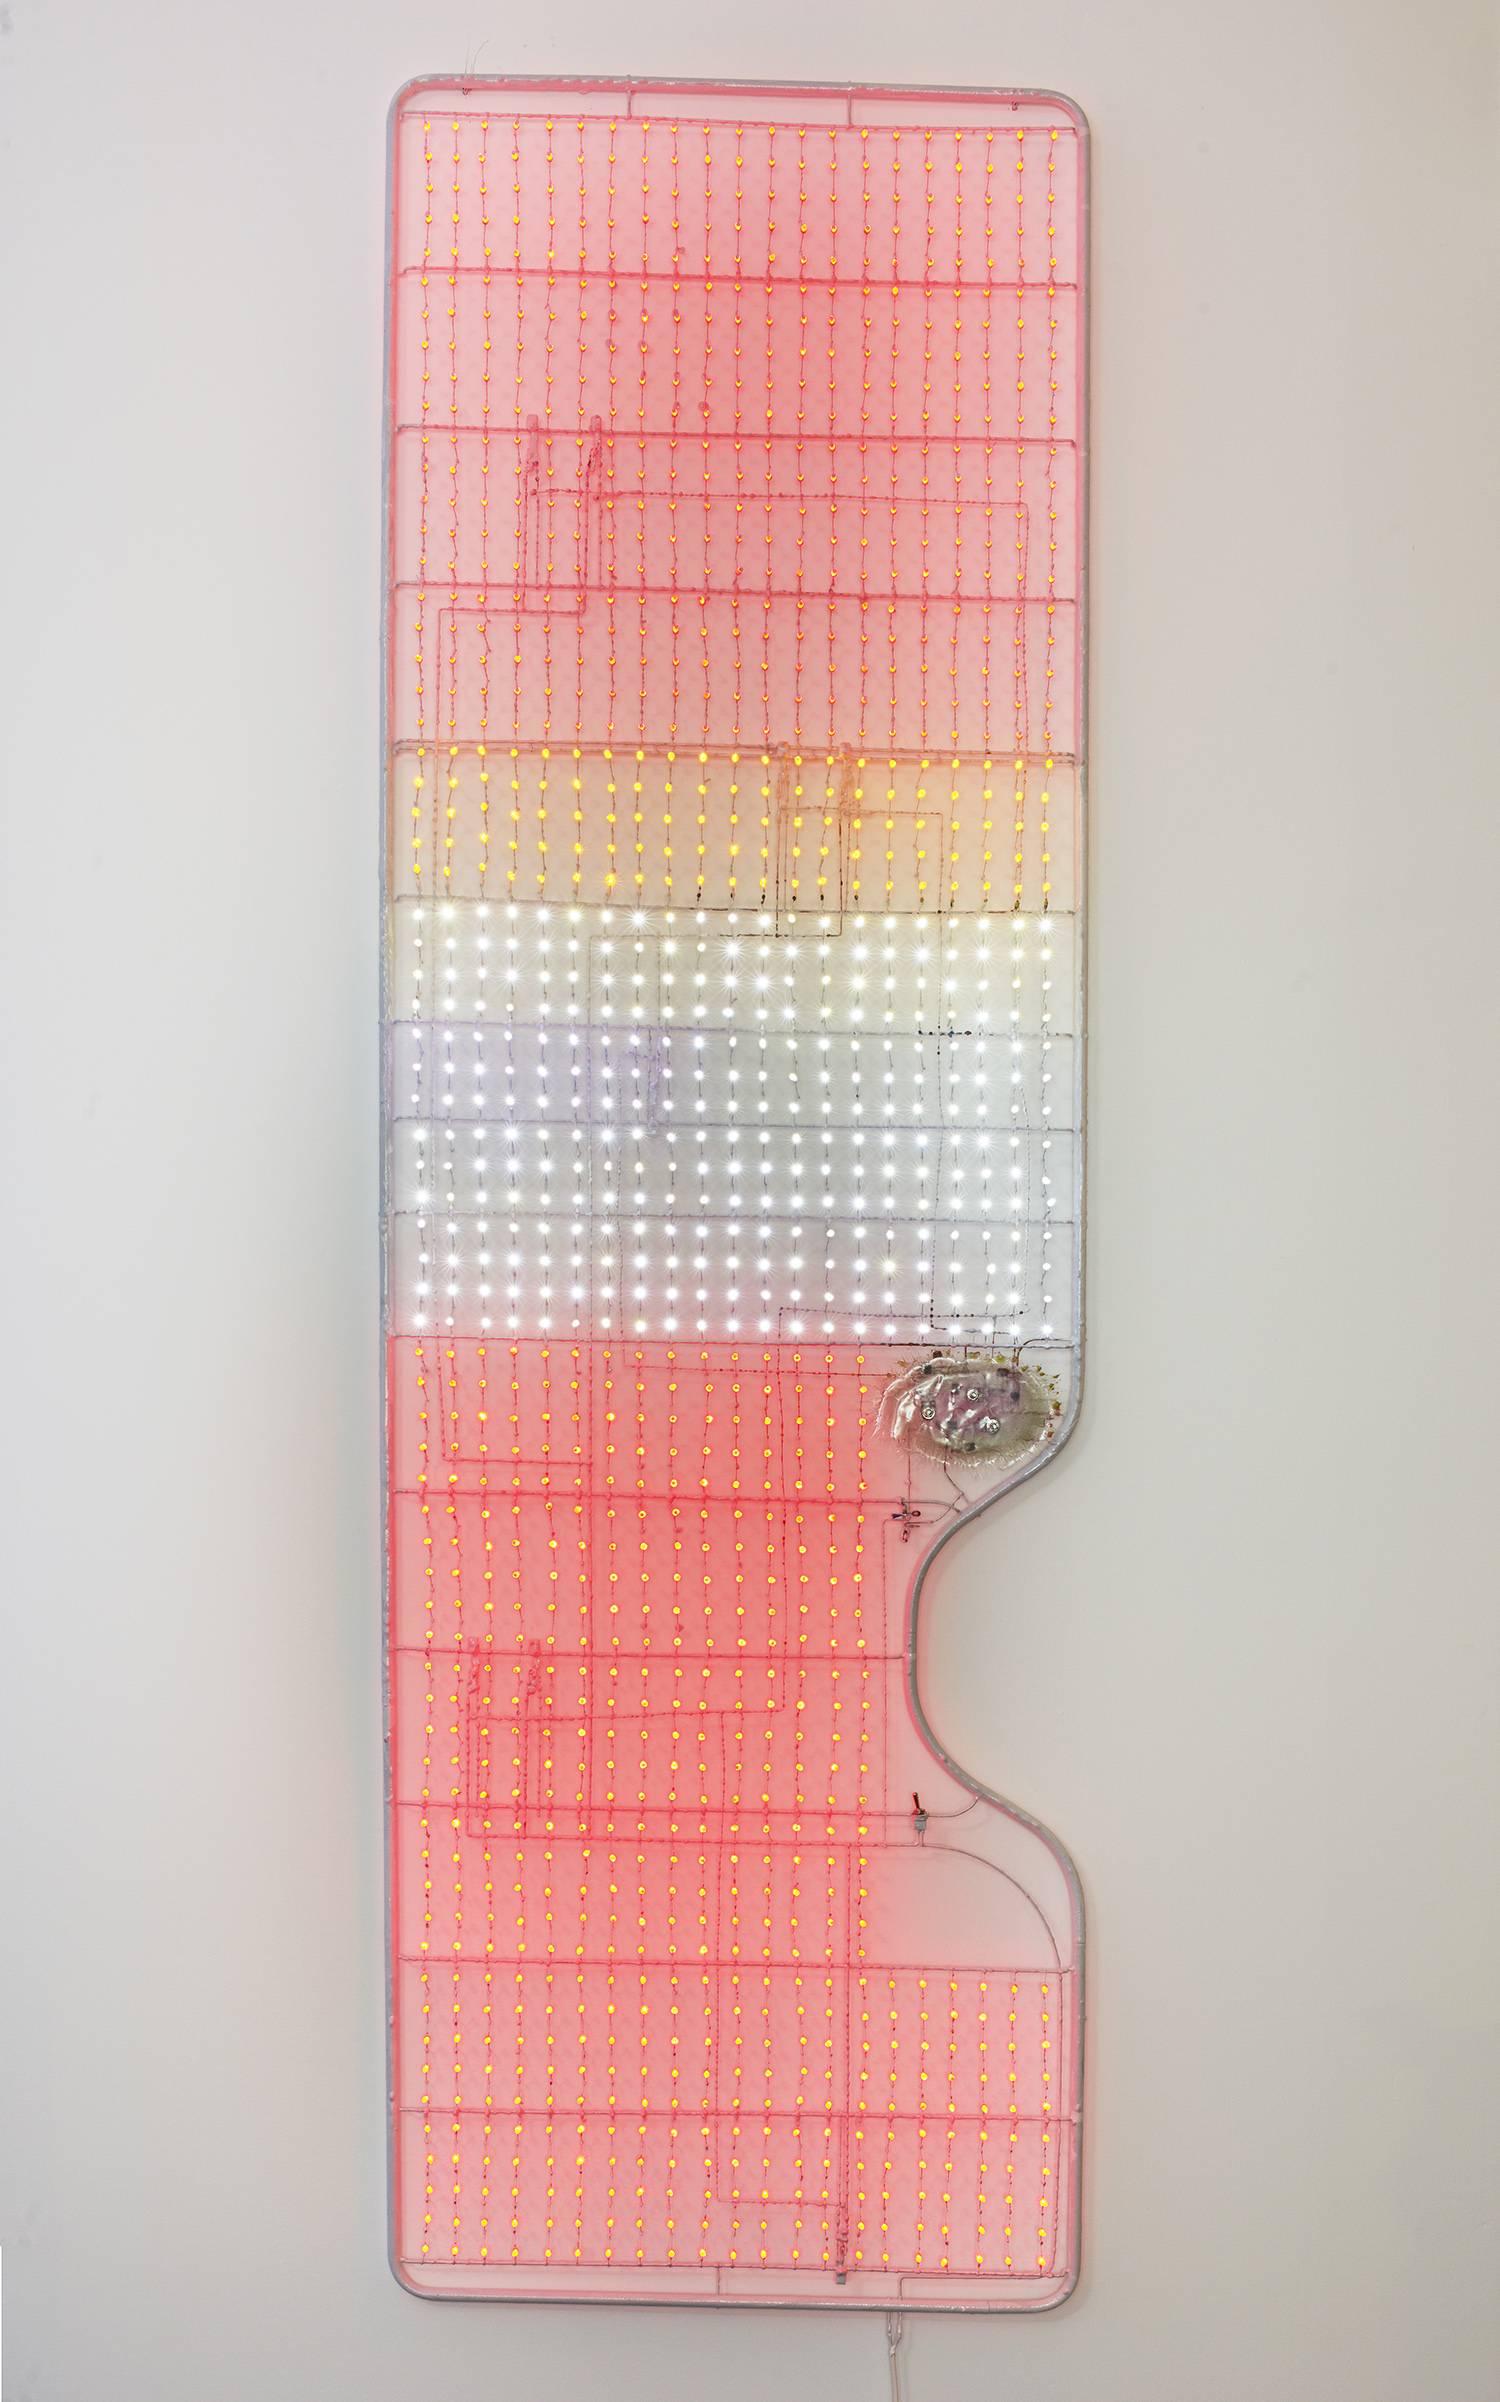 Big R-Ed
Hanging Wall Lamp in Epoxy resin, pigment, red led with light-dimming control David Lindberg, 2017
Commissioned by Camp Design Gallery

One of a kind
Commissioned by Camp Design Gallery for Design Miami 2017, the Big R-Ed wall light is part